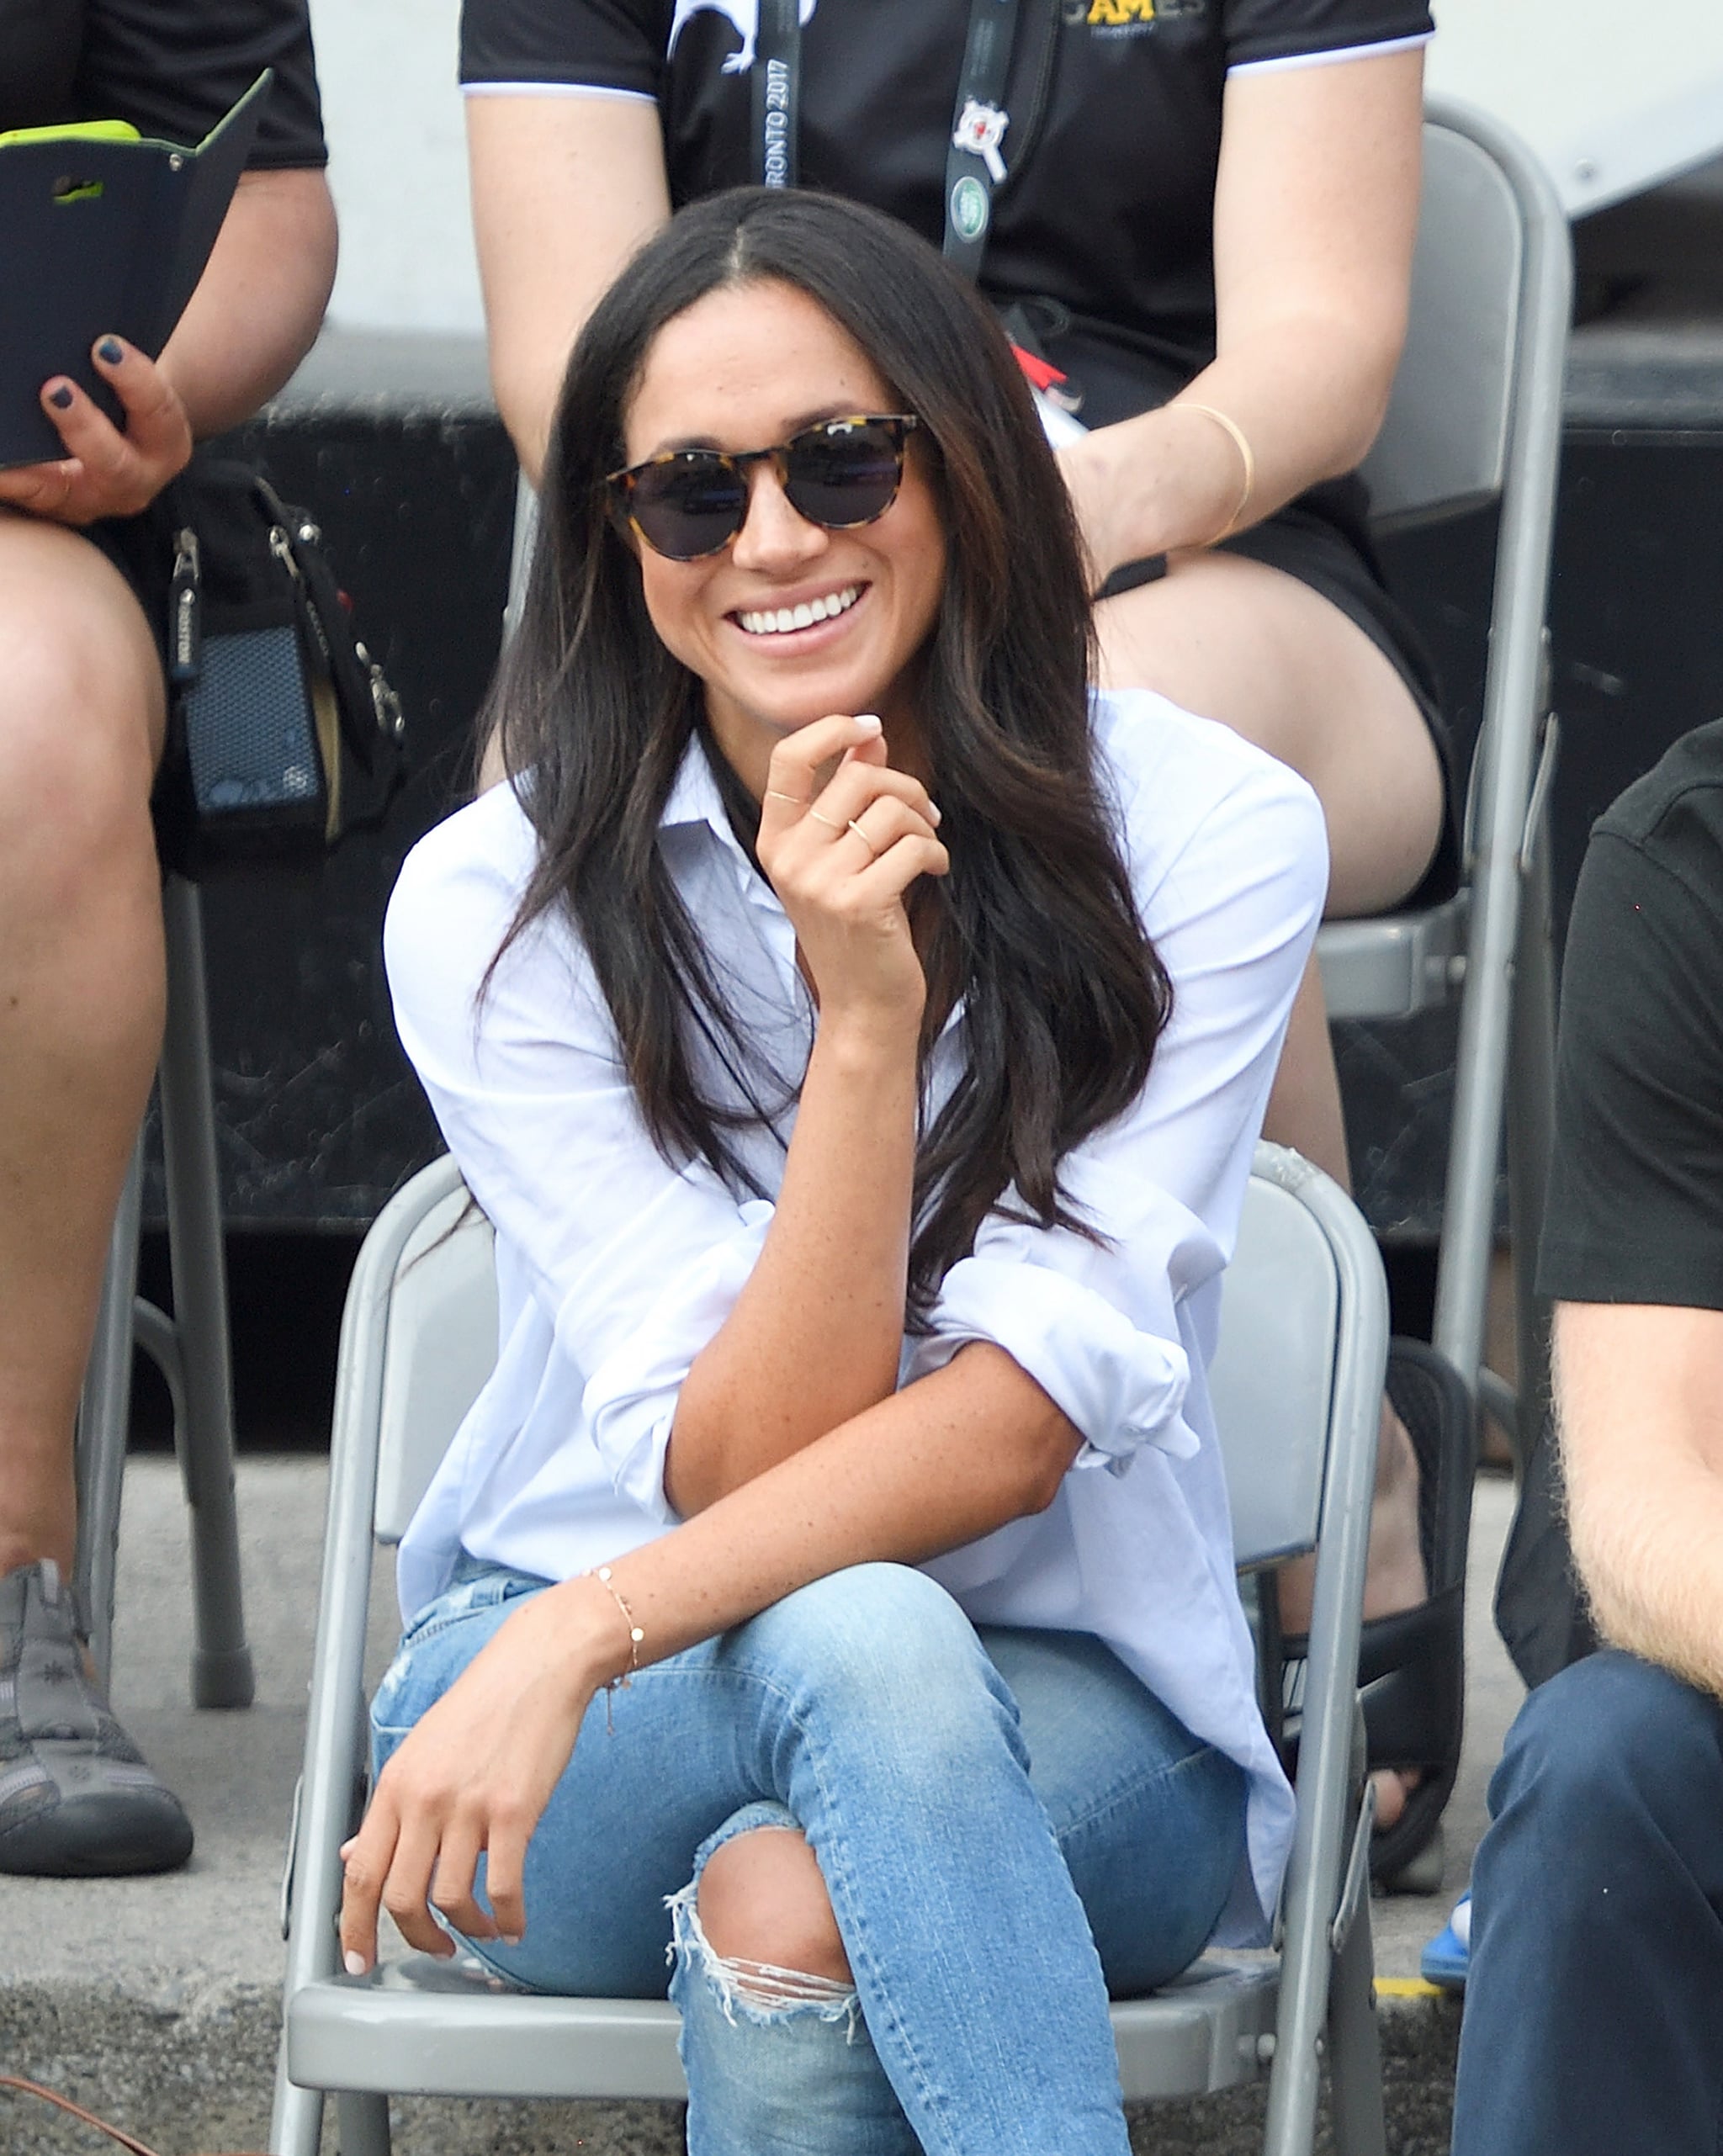 TORONTO, ON - SEPTEMBER 25:  Meghan Markle attends the Wheelchair Tennis on day 3 of the Invictus Games Toronto 2017 at Nathan Philips Square on September 25, 2017 in Toronto, Canada.  The Games use the power of sport to inspire recovery, support rehabilitation and generate a wider understanding and respect for the Armed Forces.  (Photo by Karwai Tang/WireImage)